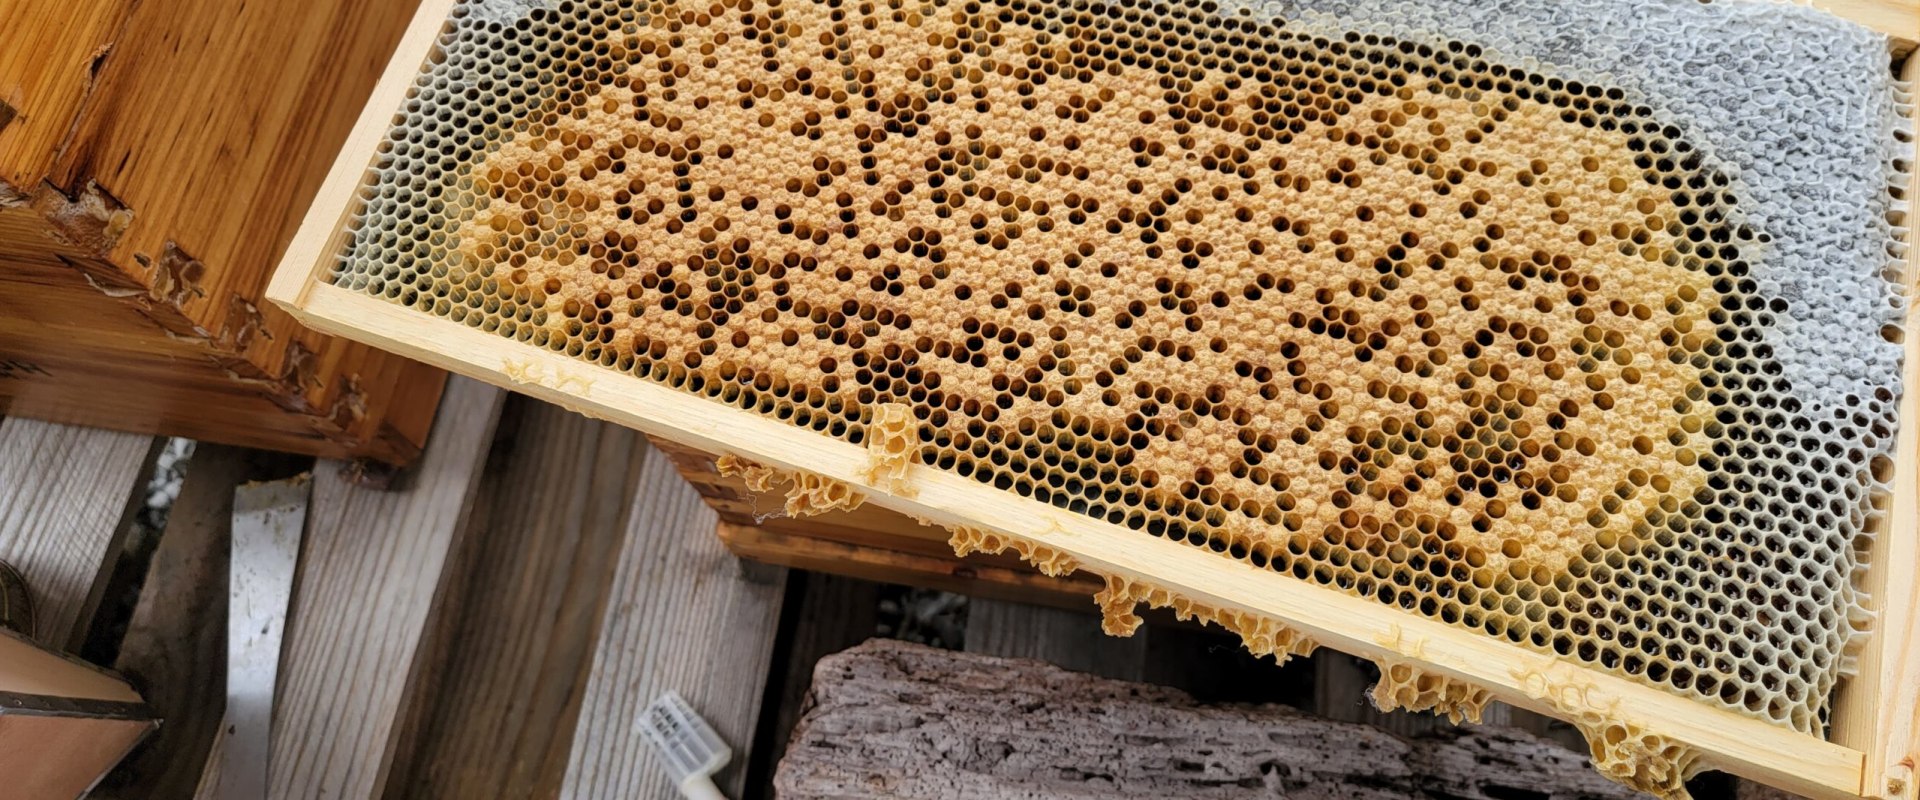 How long does a hive of bees last?